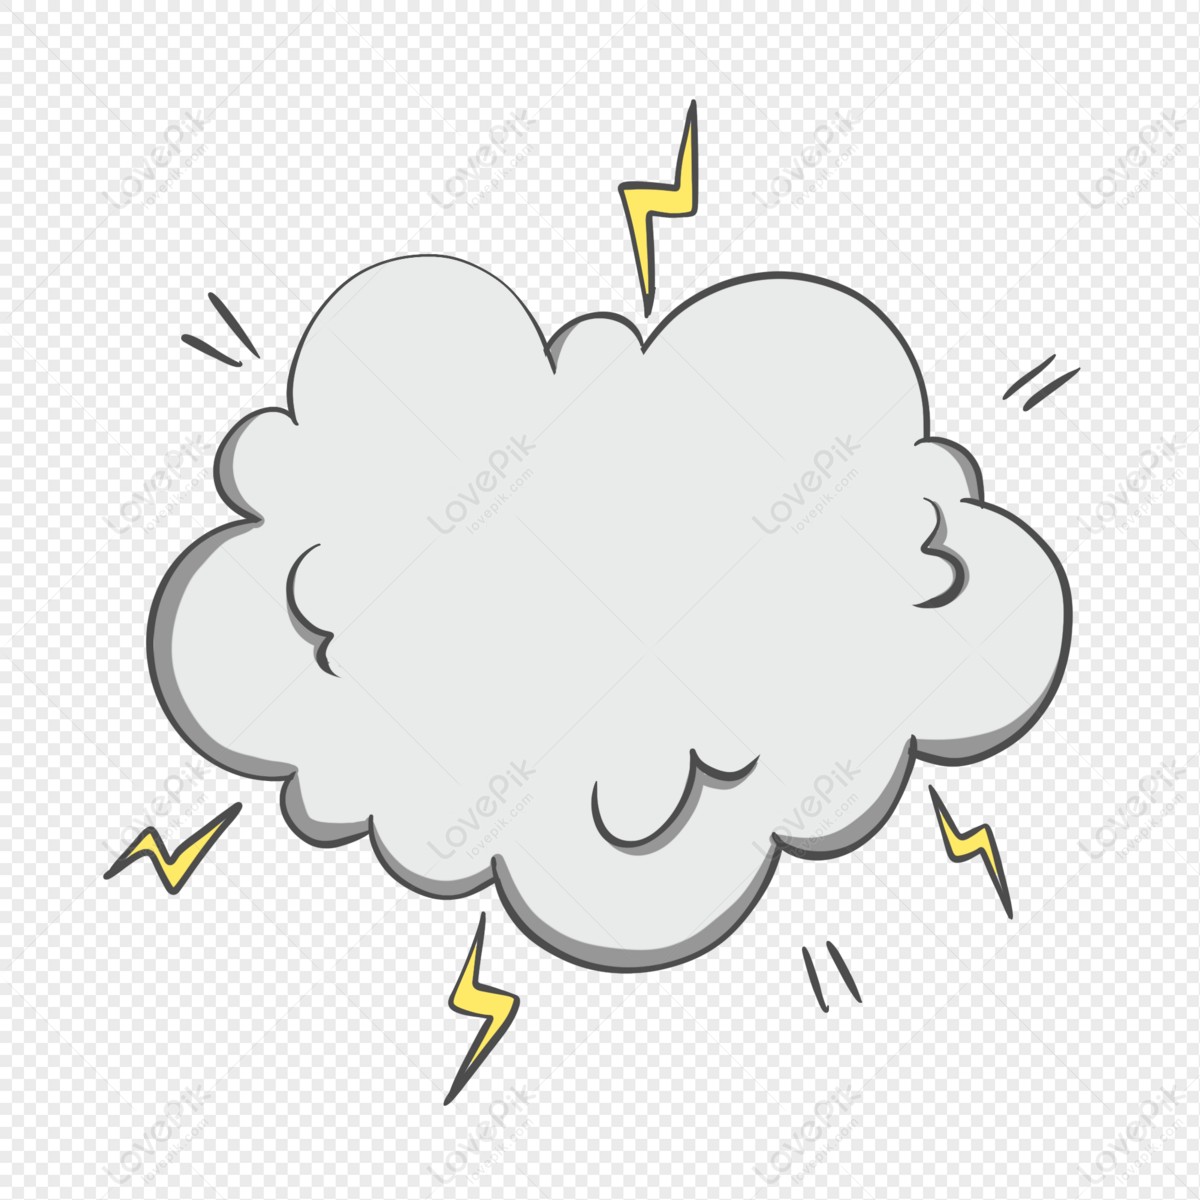 Cartoon Black Cloud Lightning Bubble Frame PNG Transparent Background And  Clipart Image For Free Download - Lovepik | 401491670